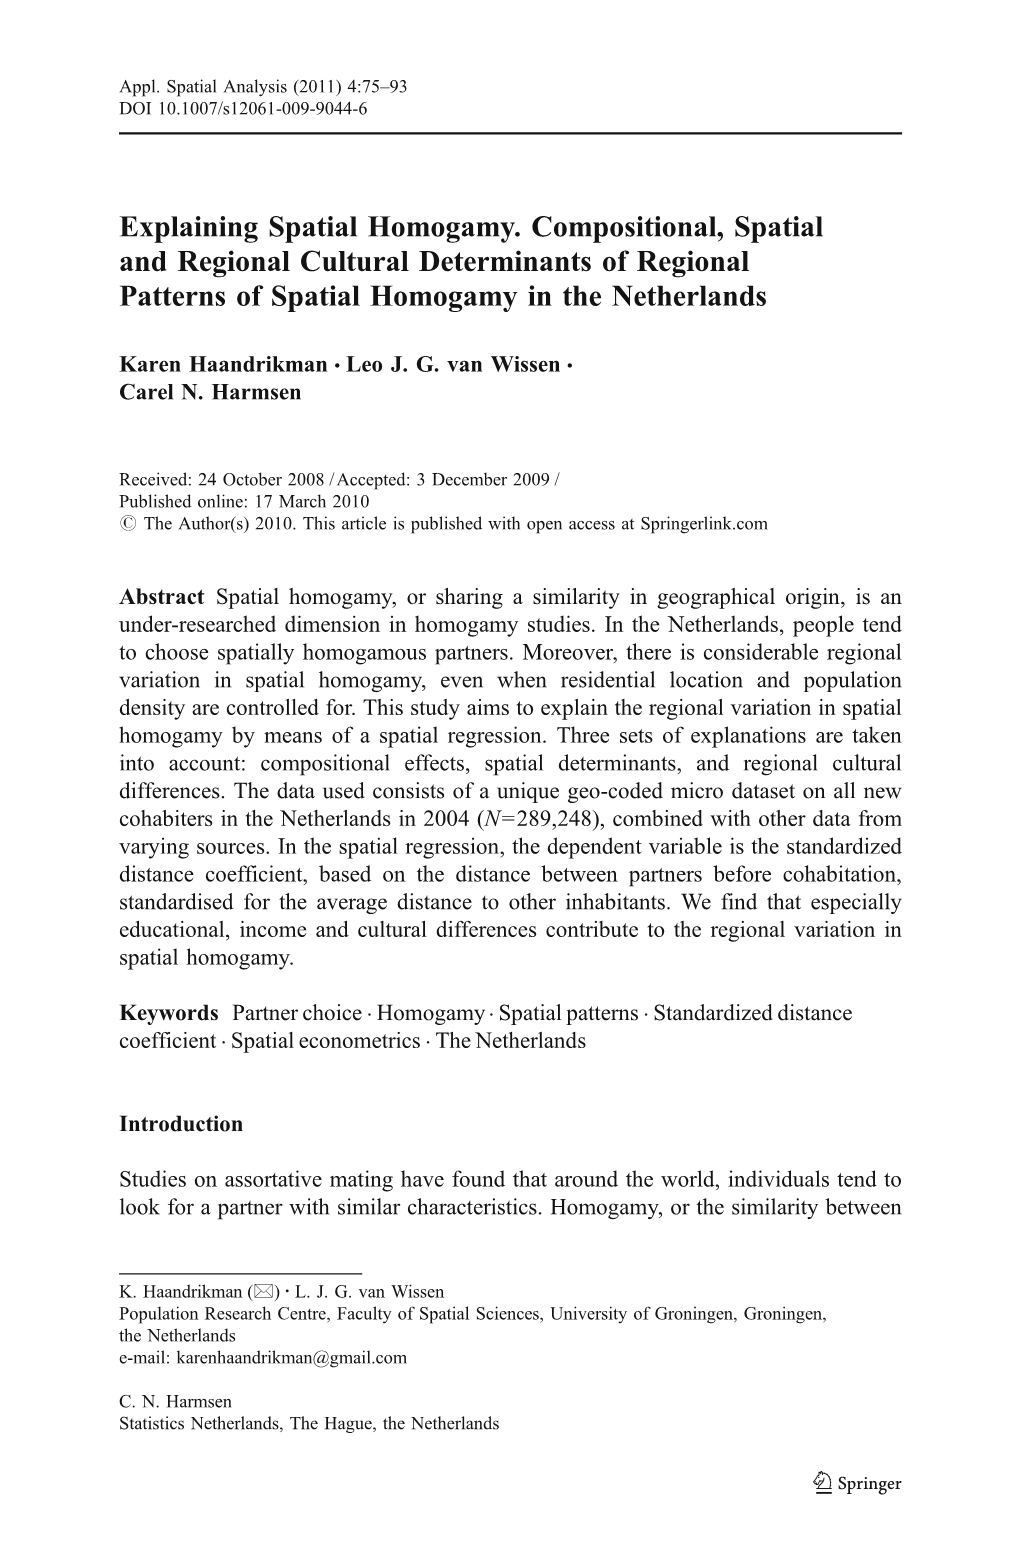 Explaining Spatial Homogamy. Compositional, Spatial and Regional Cultural Determinants of Regional Patterns of Spatial Homogamy in the Netherlands